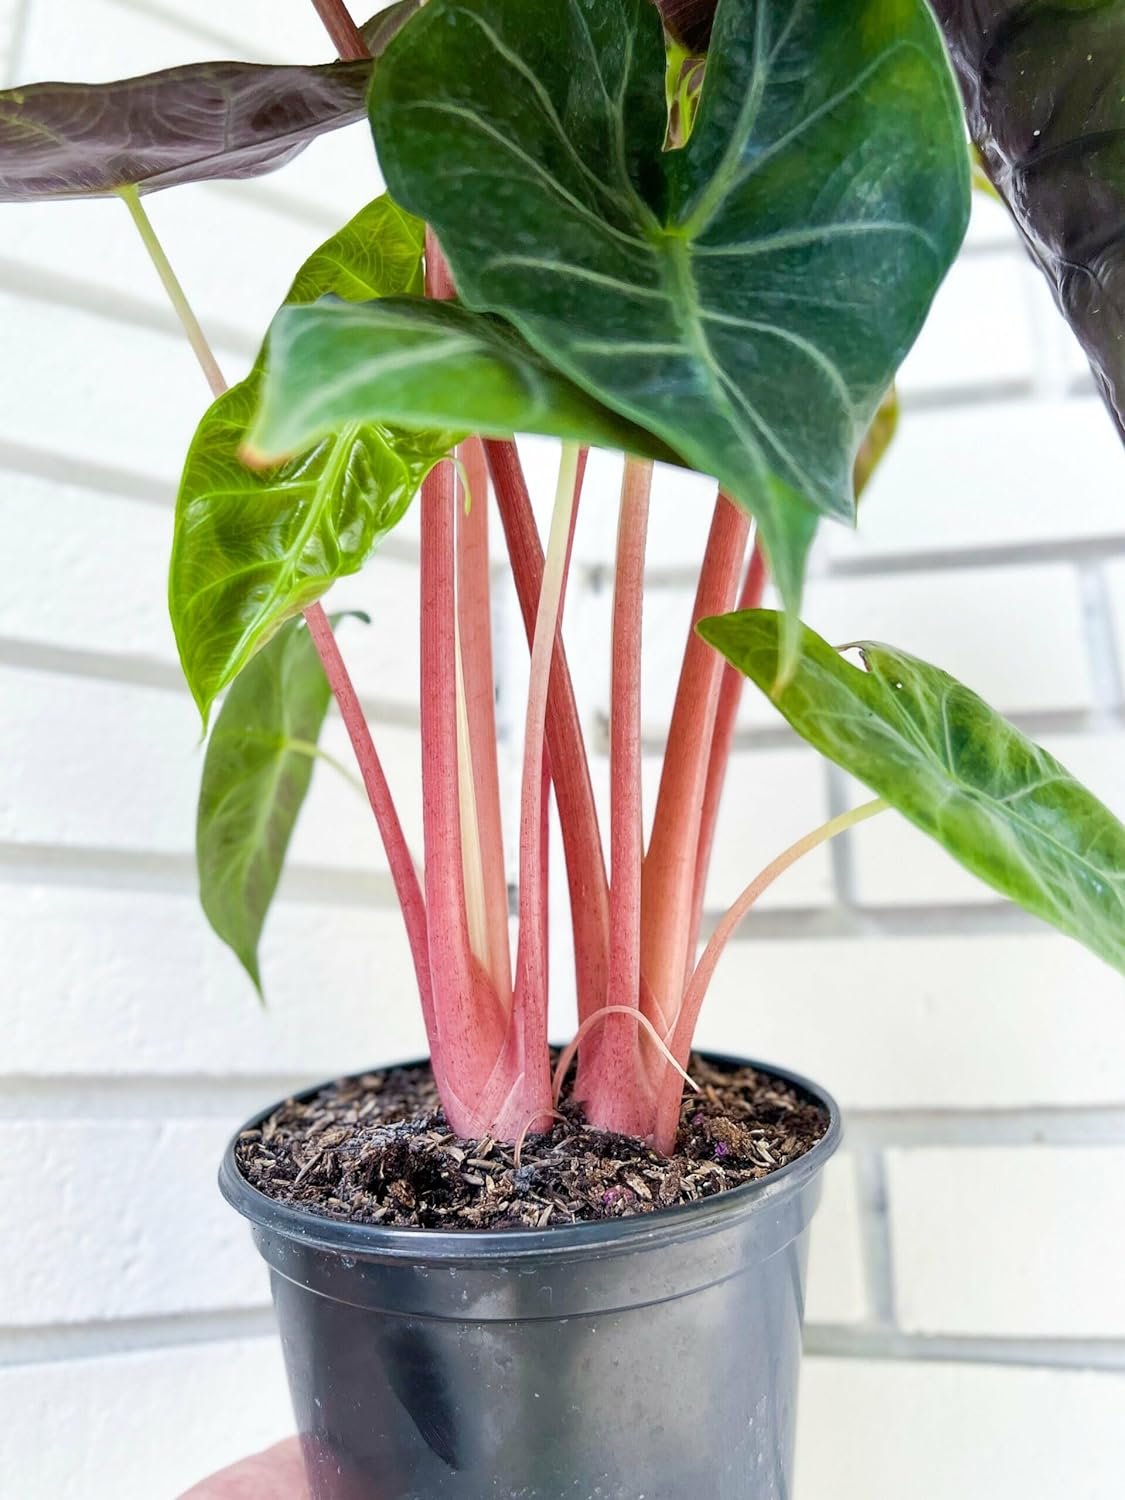 Morroco Alocasia - Live Plant in a 4 Inch Pot - Alocasia - Florist Quality Air Purifying Indoor Plant - Nature's Masterpiece in Your Home - image 2 of 5